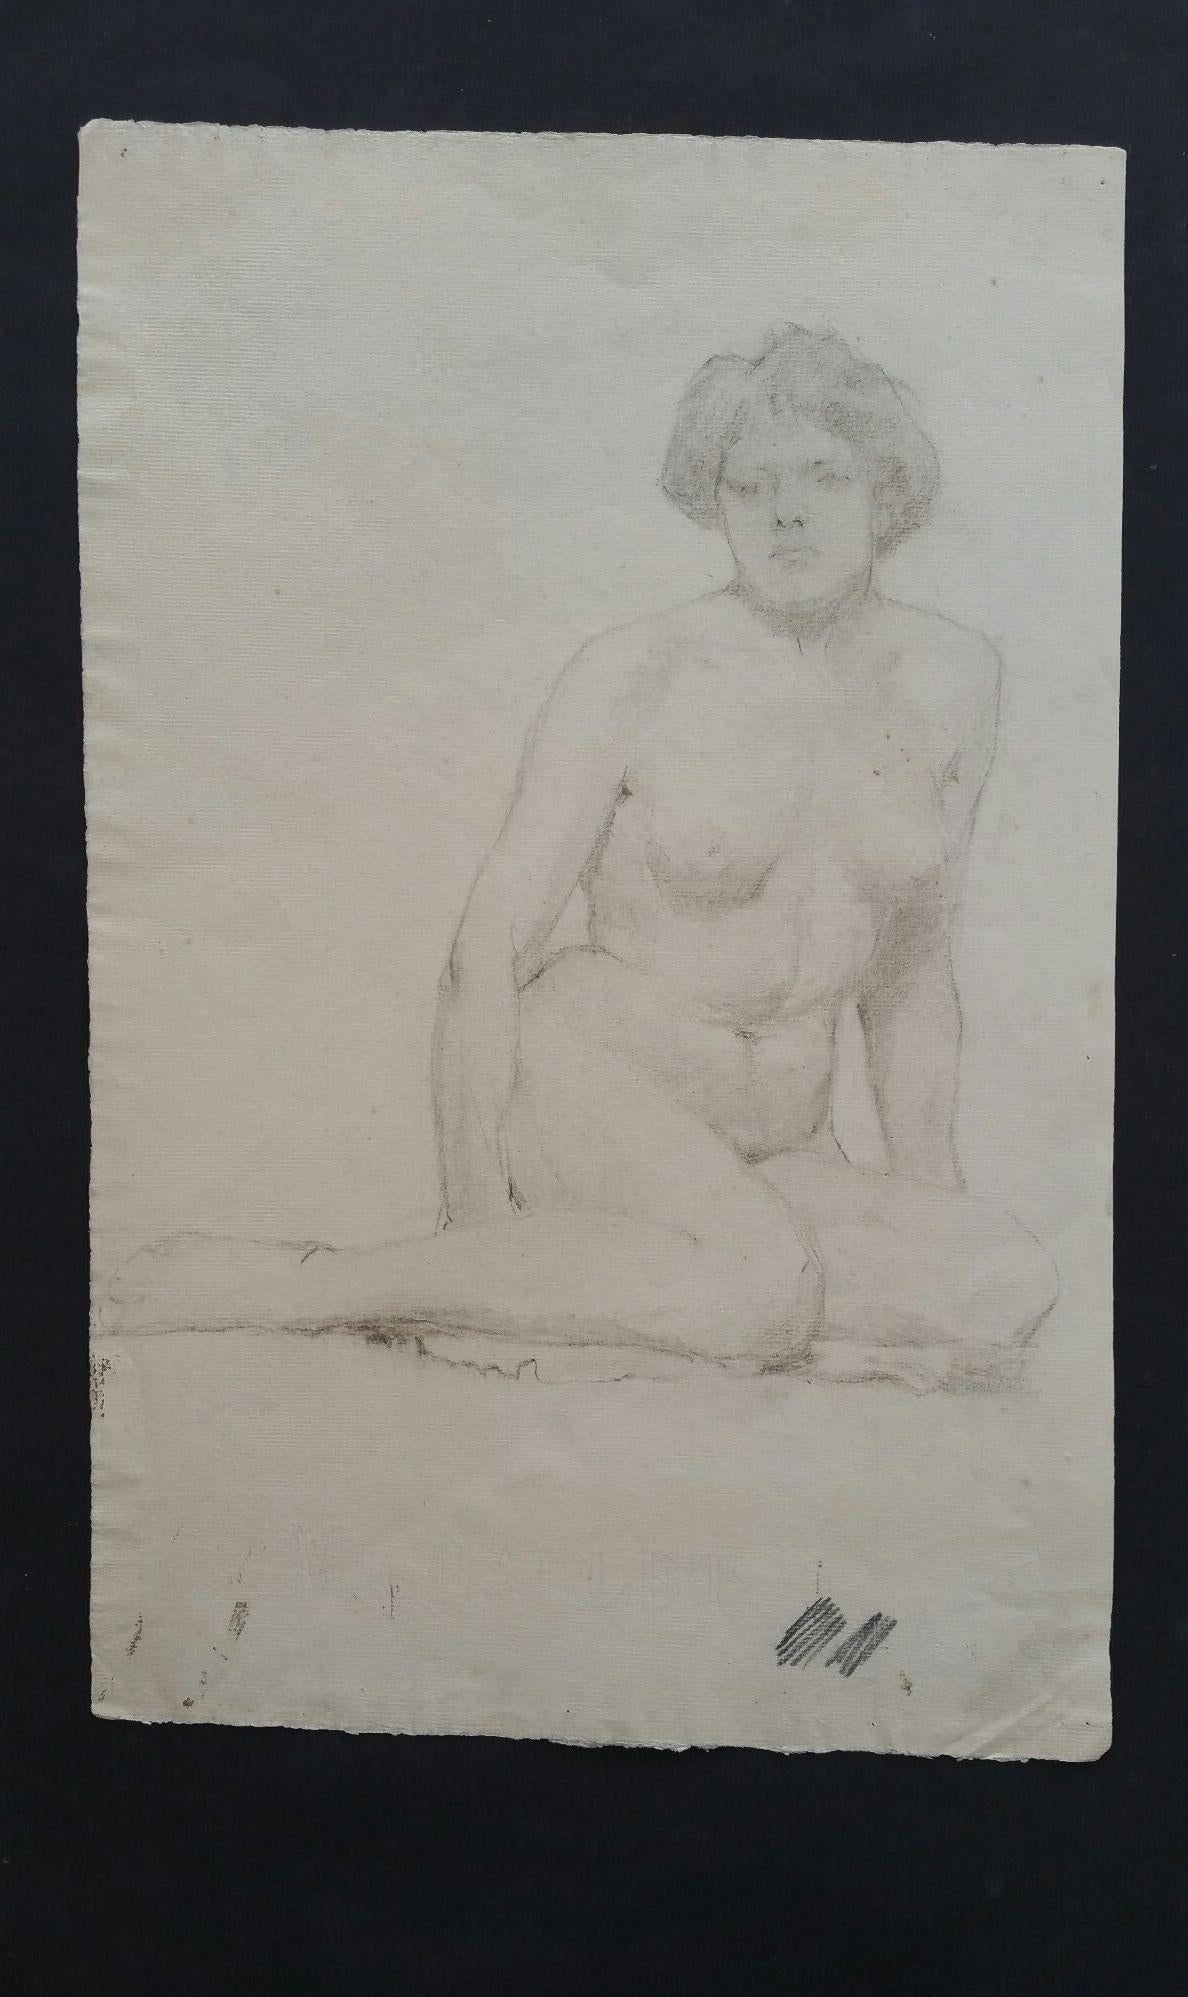 English Graphite Sketch of a Female Nude, Seated on Floor
by Henry George Moon (British 1857-1905)
on off white artists paper, unframed
measurements: sheet 18.75 x 12 inches 

provenance: from the artists estate

Condition report: pin holes